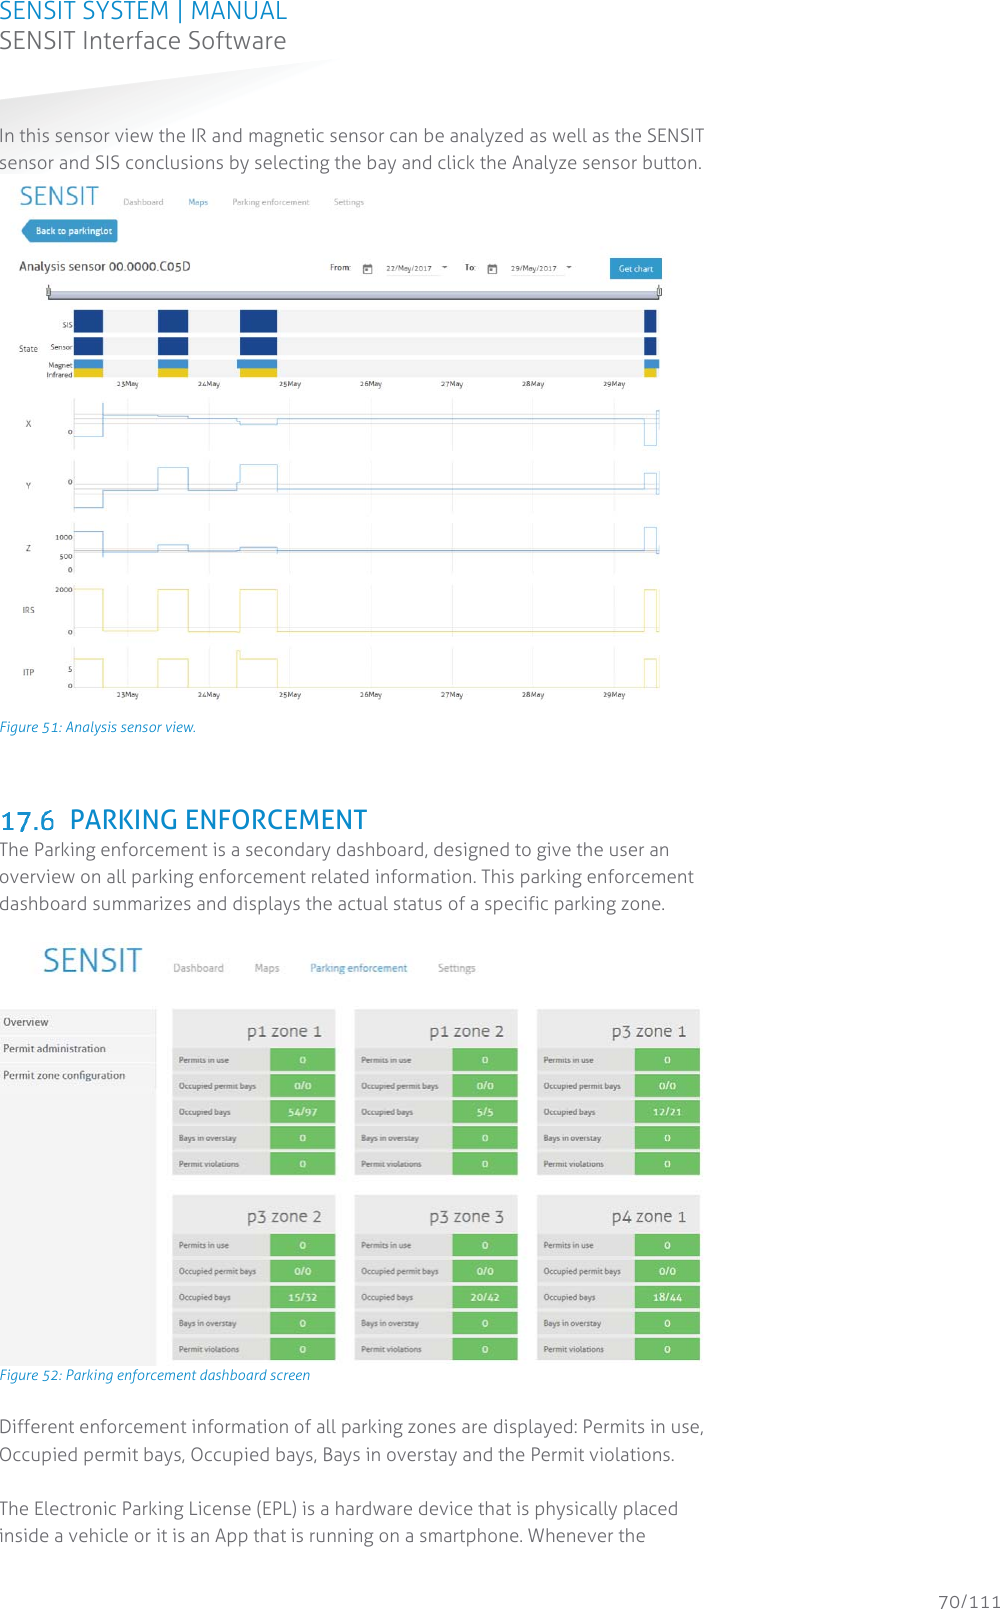 SENSIT SYSTEM | MANUAL SENSIT Interface Software  70/111 SENSIT InterfaceSoftwareIn this sensor view the IR and magnetic sensor can be analyzed as well as the SENSIT sensor and SIS conclusions by selecting the bay and click the Analyze sensor button.  Figure 51: Analysis sensor view.    PARKING ENFORCEMENT The Parking enforcement is a secondary dashboard, designed to give the user an overview on all parking enforcement related information. This parking enforcement dashboard summarizes and displays the actual status of a specific parking zone.   Figure 52: Parking enforcement dashboard screen Different enforcement information of all parking zones are displayed: Permits in use, Occupied permit bays, Occupied bays, Bays in overstay and the Permit violations.  The Electronic Parking License (EPL) is a hardware device that is physically placed inside a vehicle or it is an App that is running on a smartphone. Whenever the 